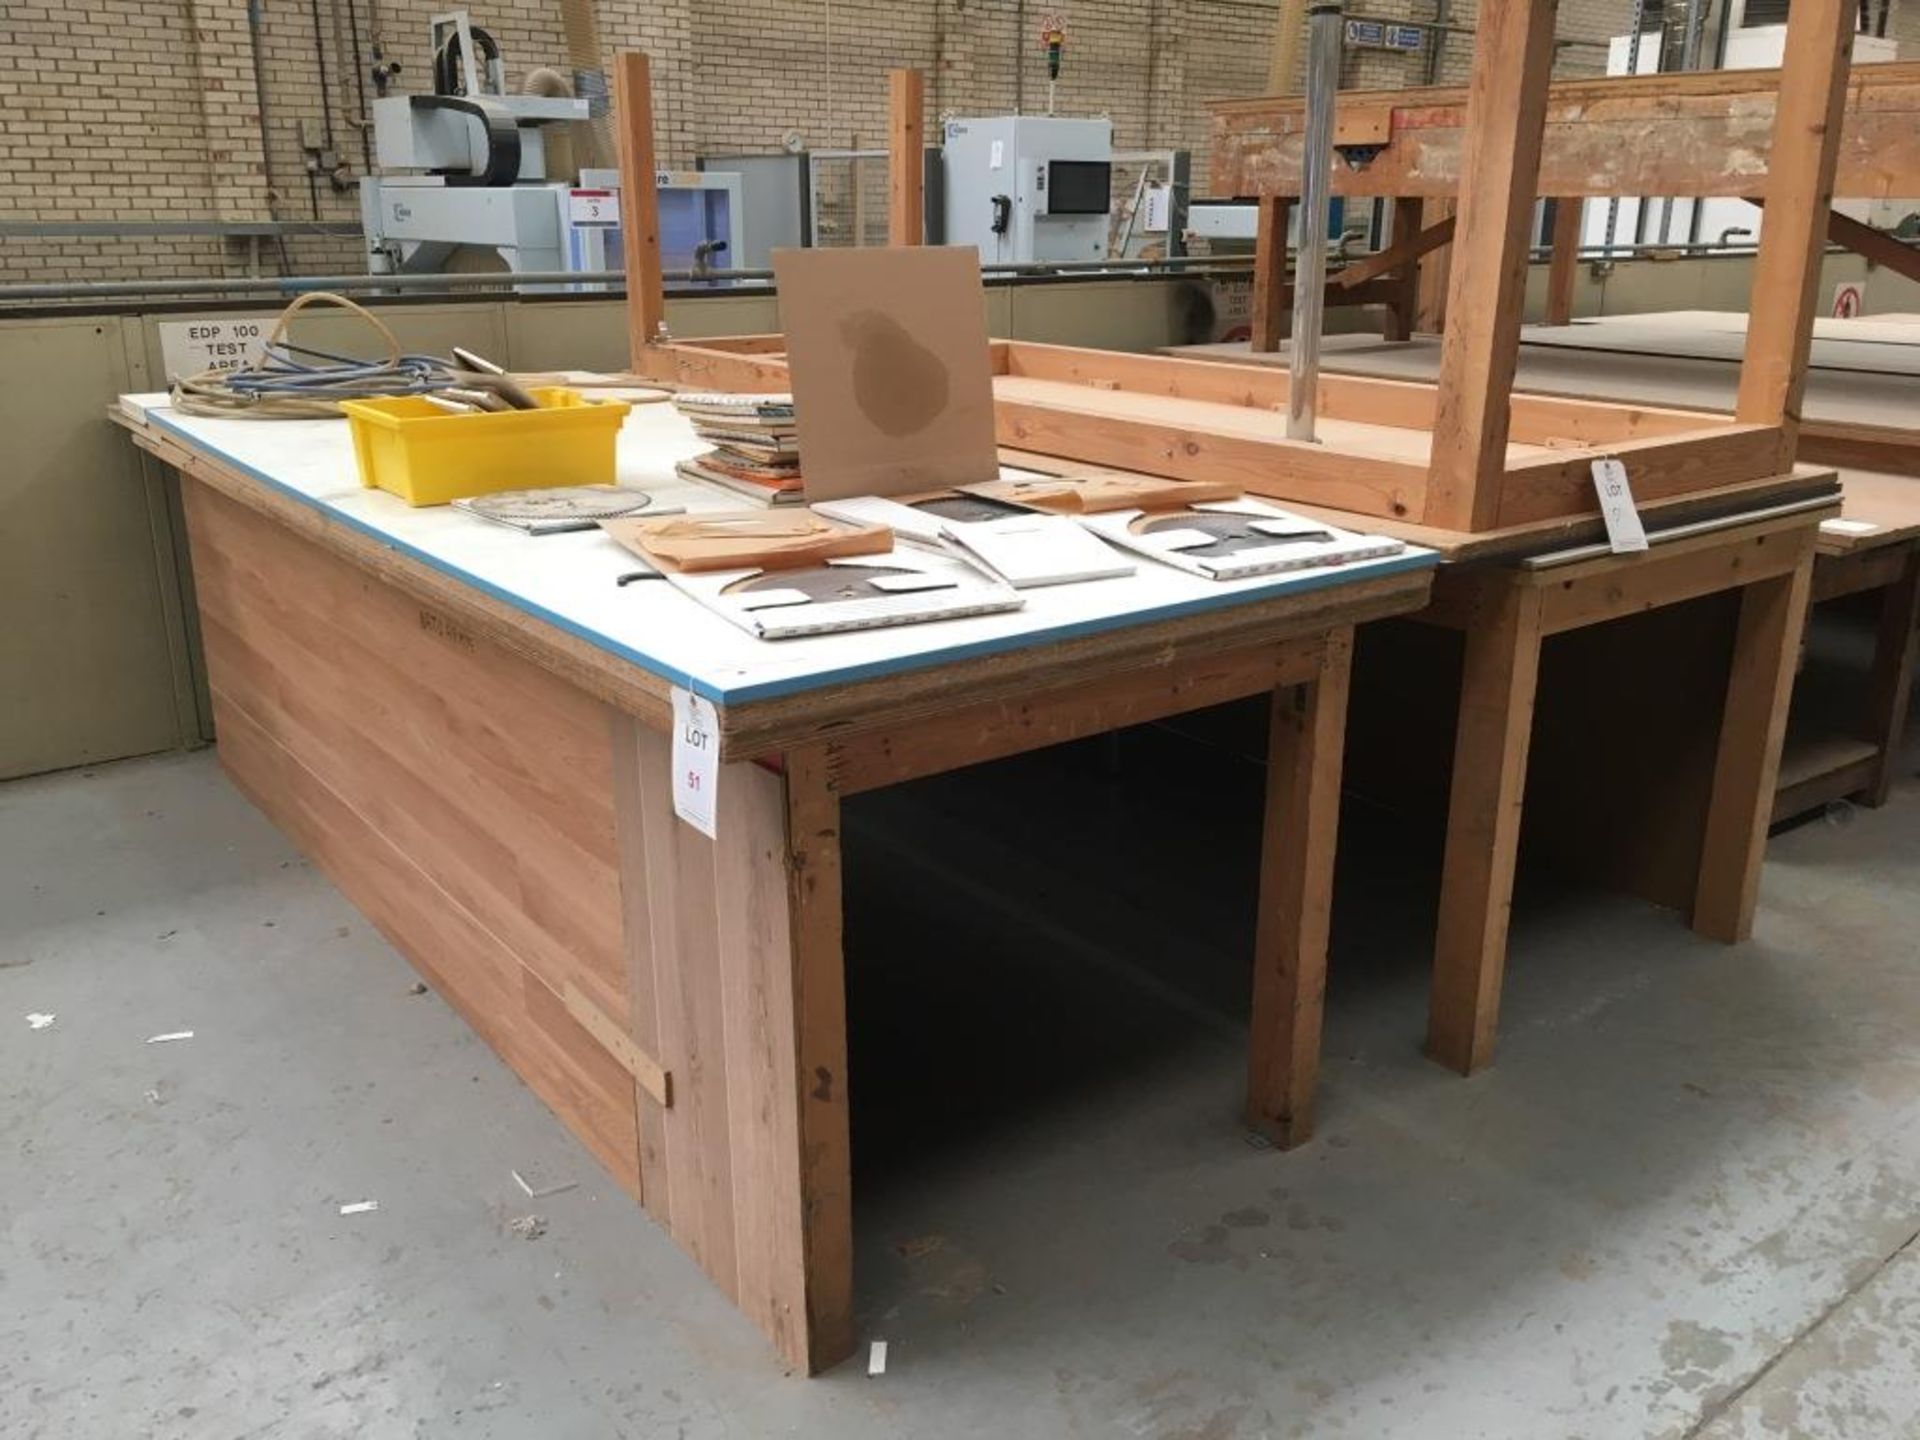 Three wooden works benches (contents not included)